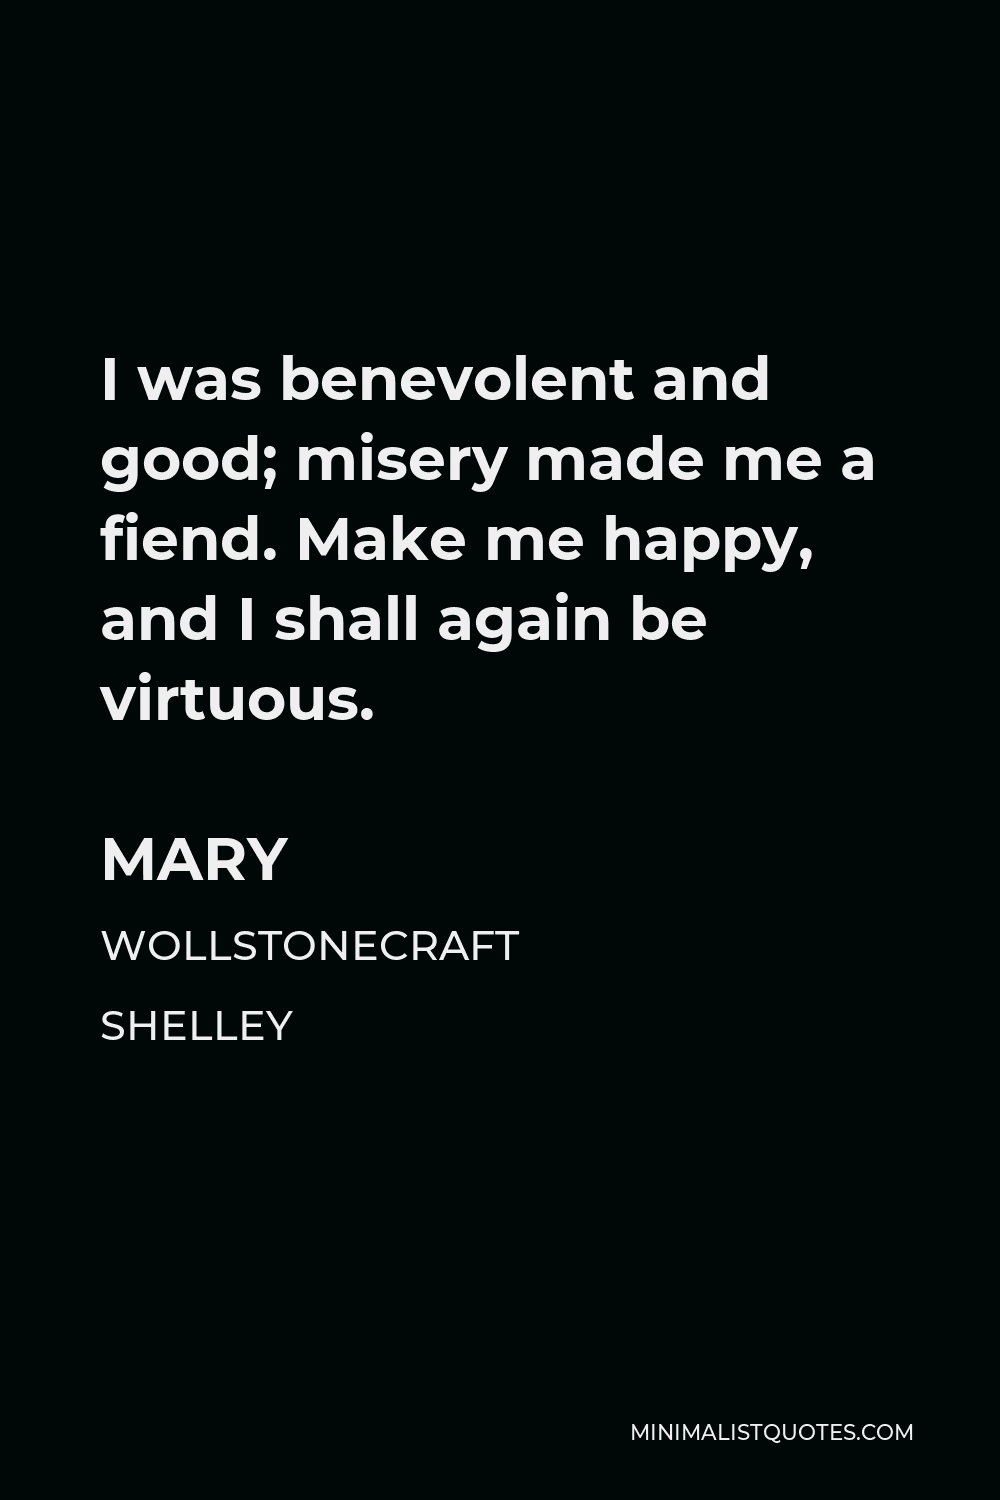 Mary Wollstonecraft Shelley Quote - I was benevolent and good; misery made me a fiend. Make me happy, and I shall again be virtuous.